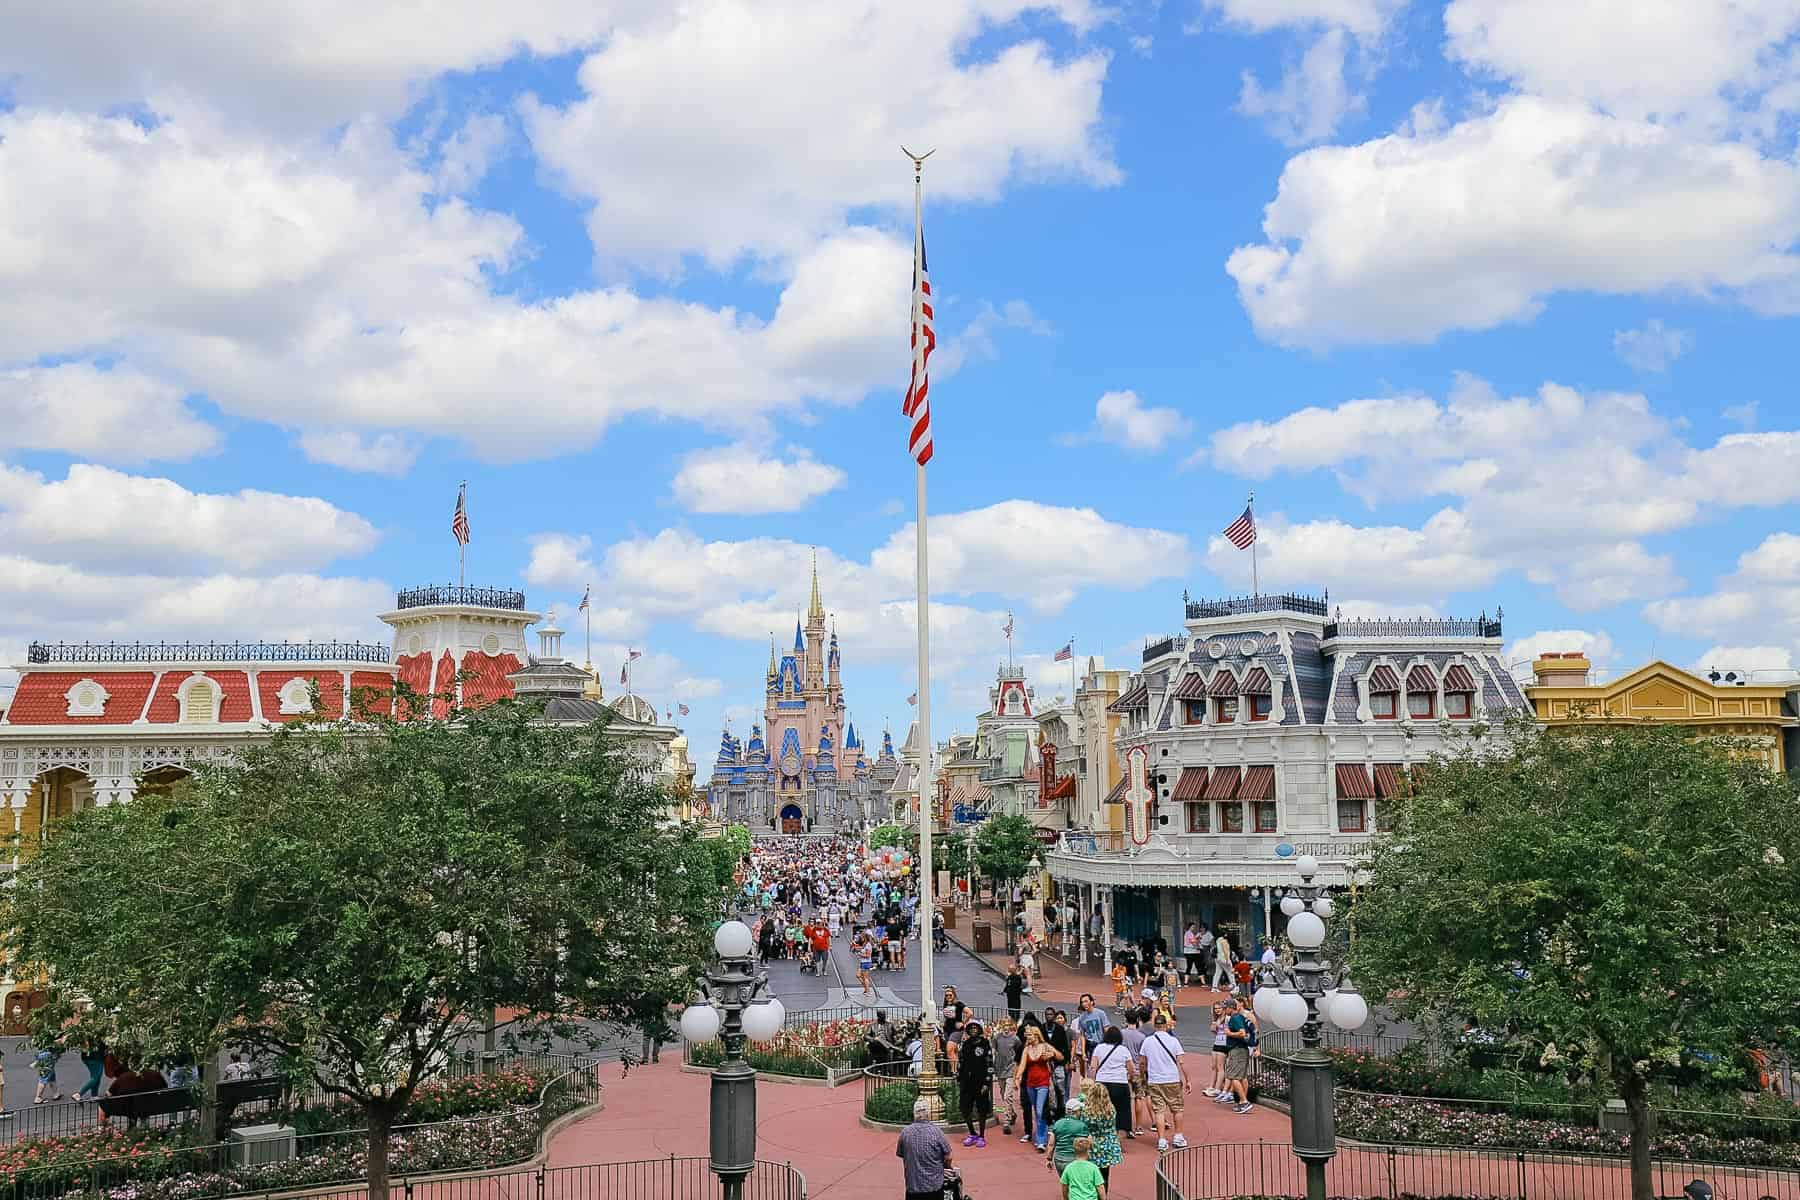 a view of Main Street USA from the Train Station at Walt Disney World 